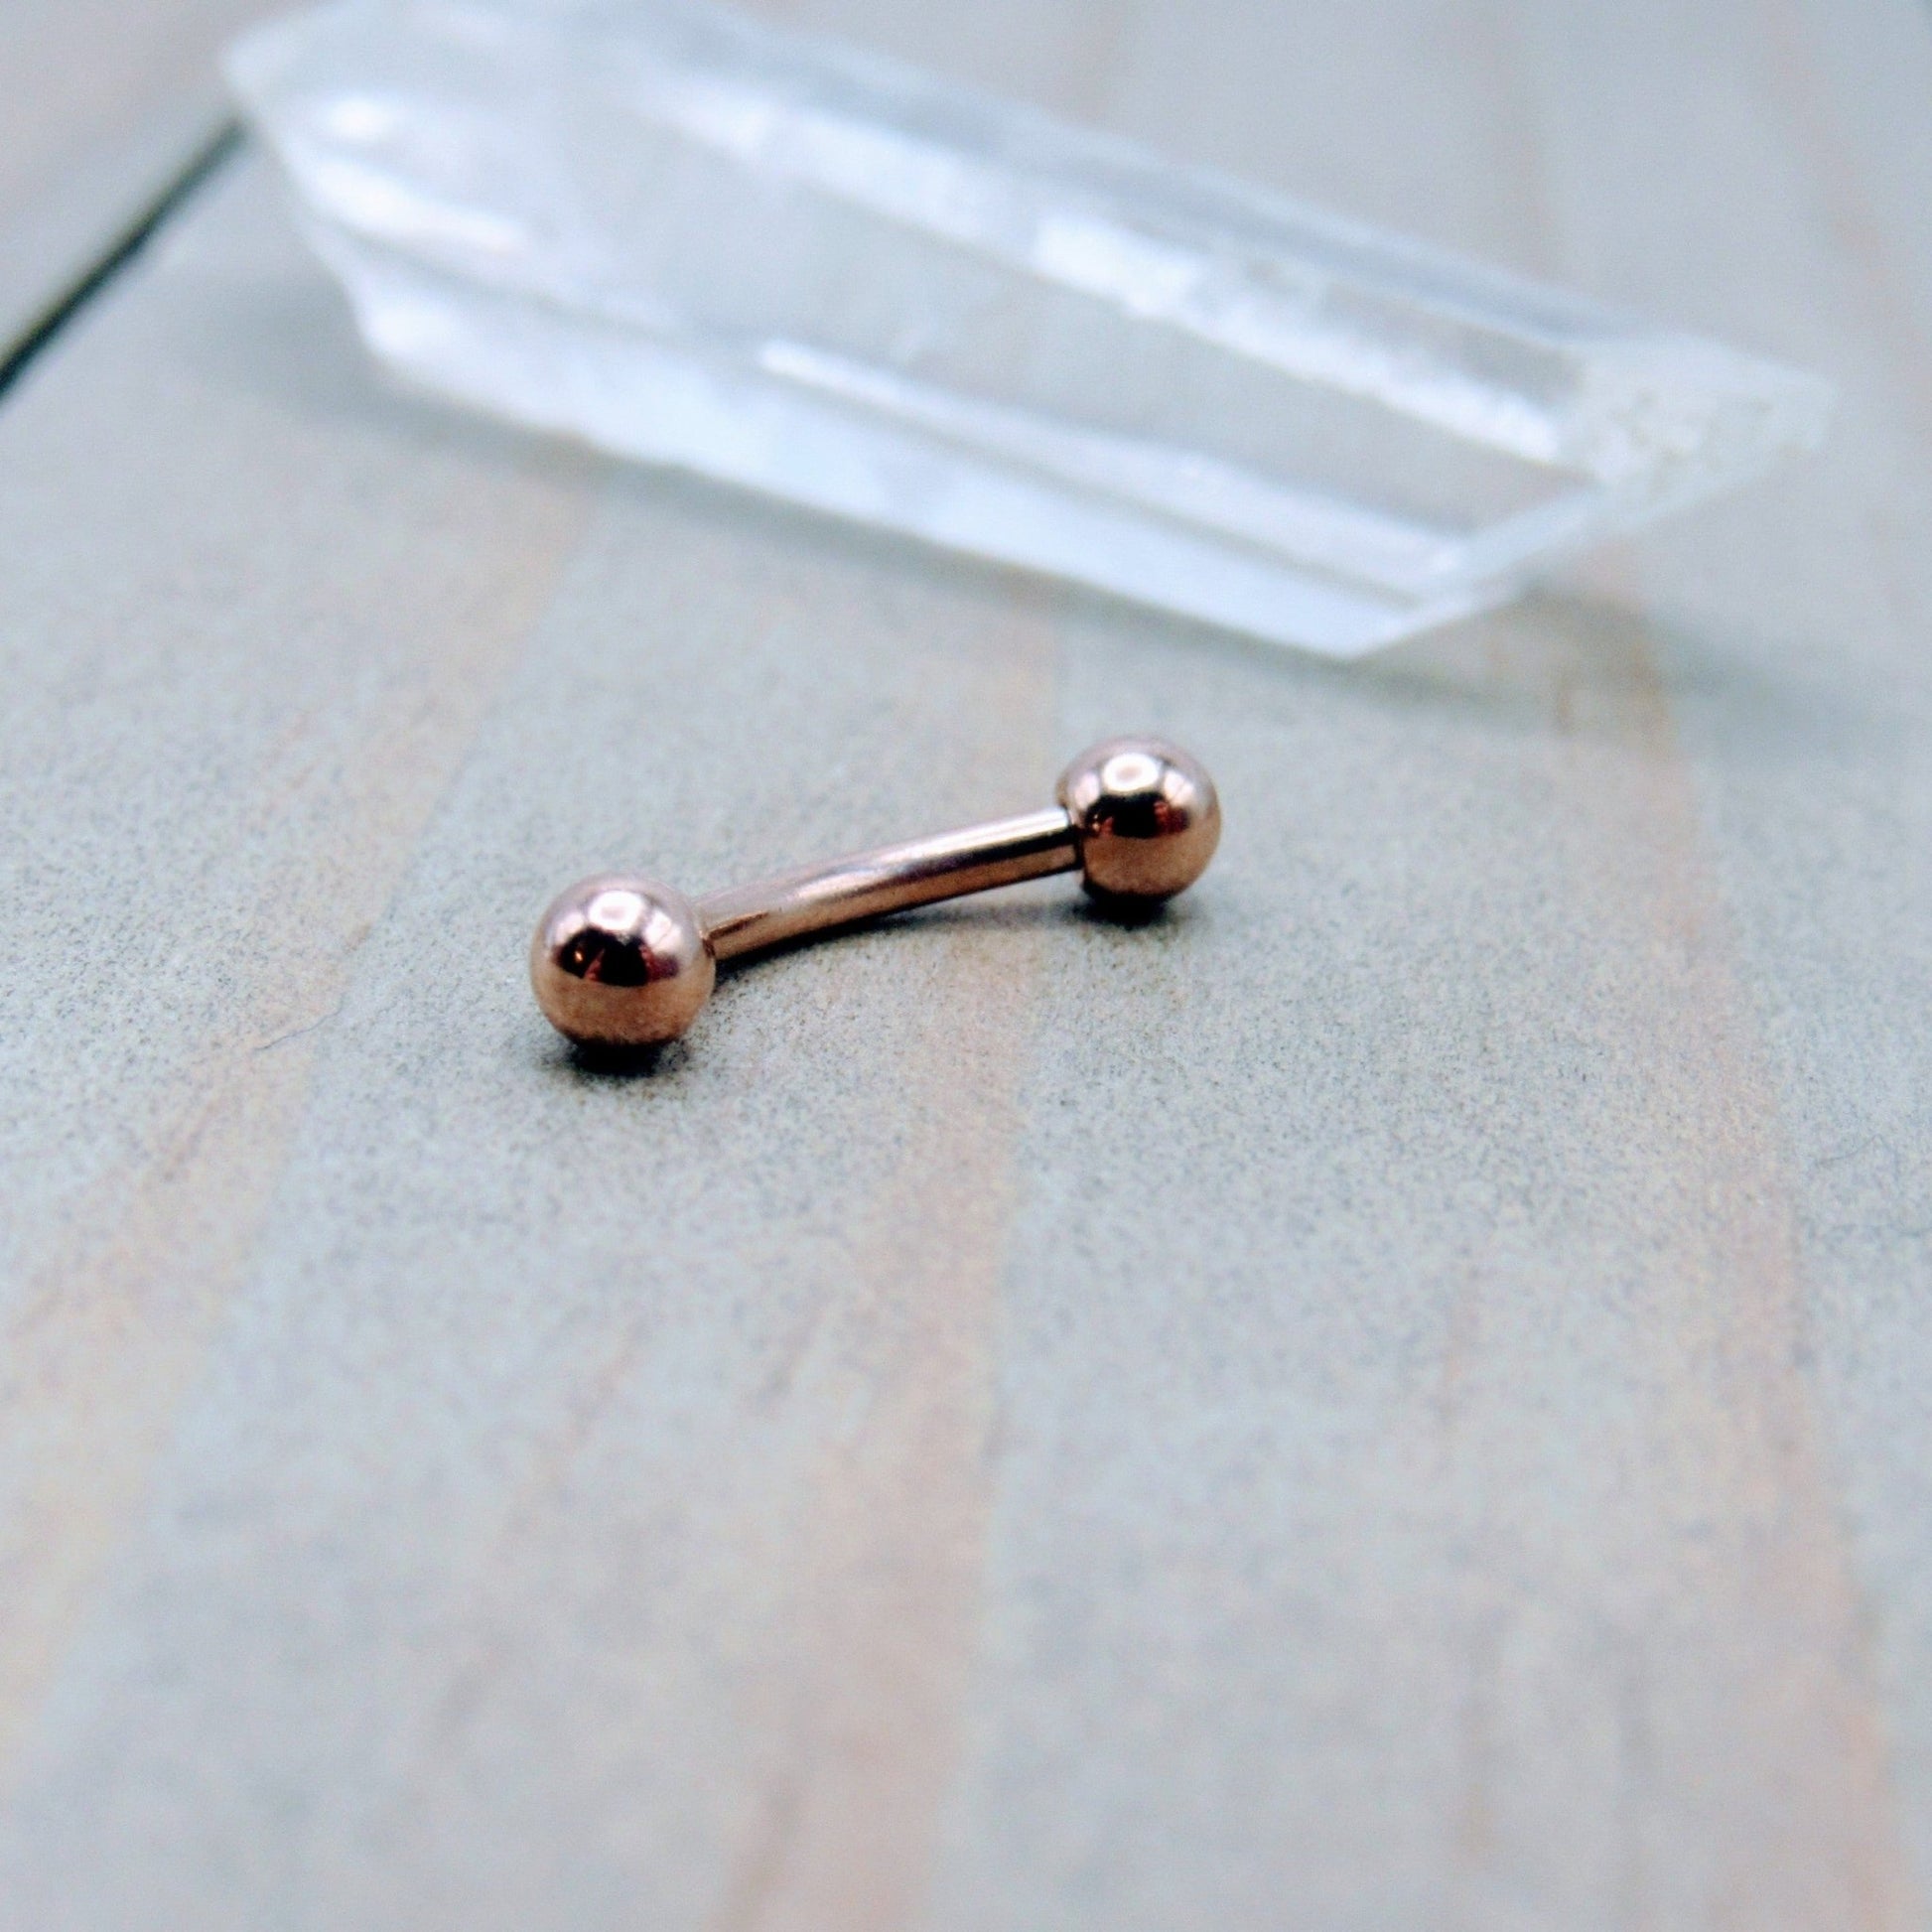 16g Rose gold curved barbell 5/16" rook daith eyebrow body piercing ring 3mm ball ends - Siren Body Jewelry